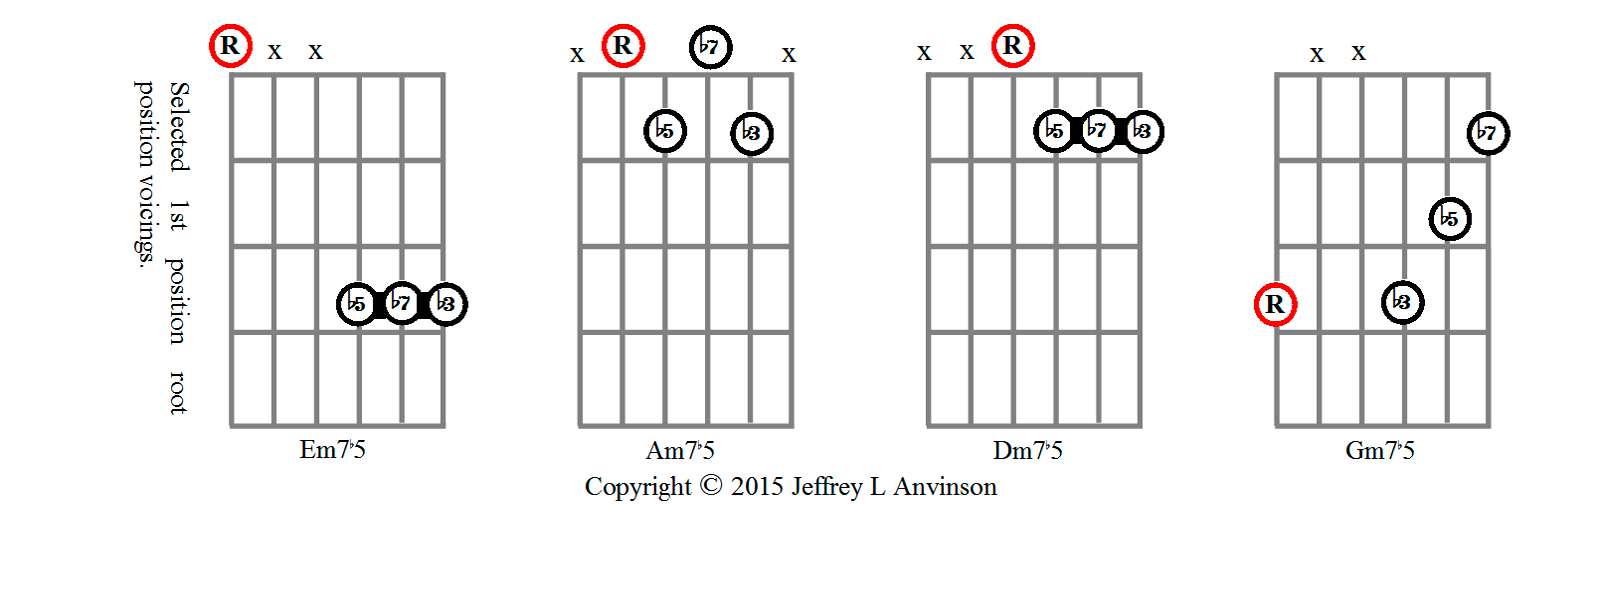 Minor Seventh Flat-Five Chords Shapes in 1st Position